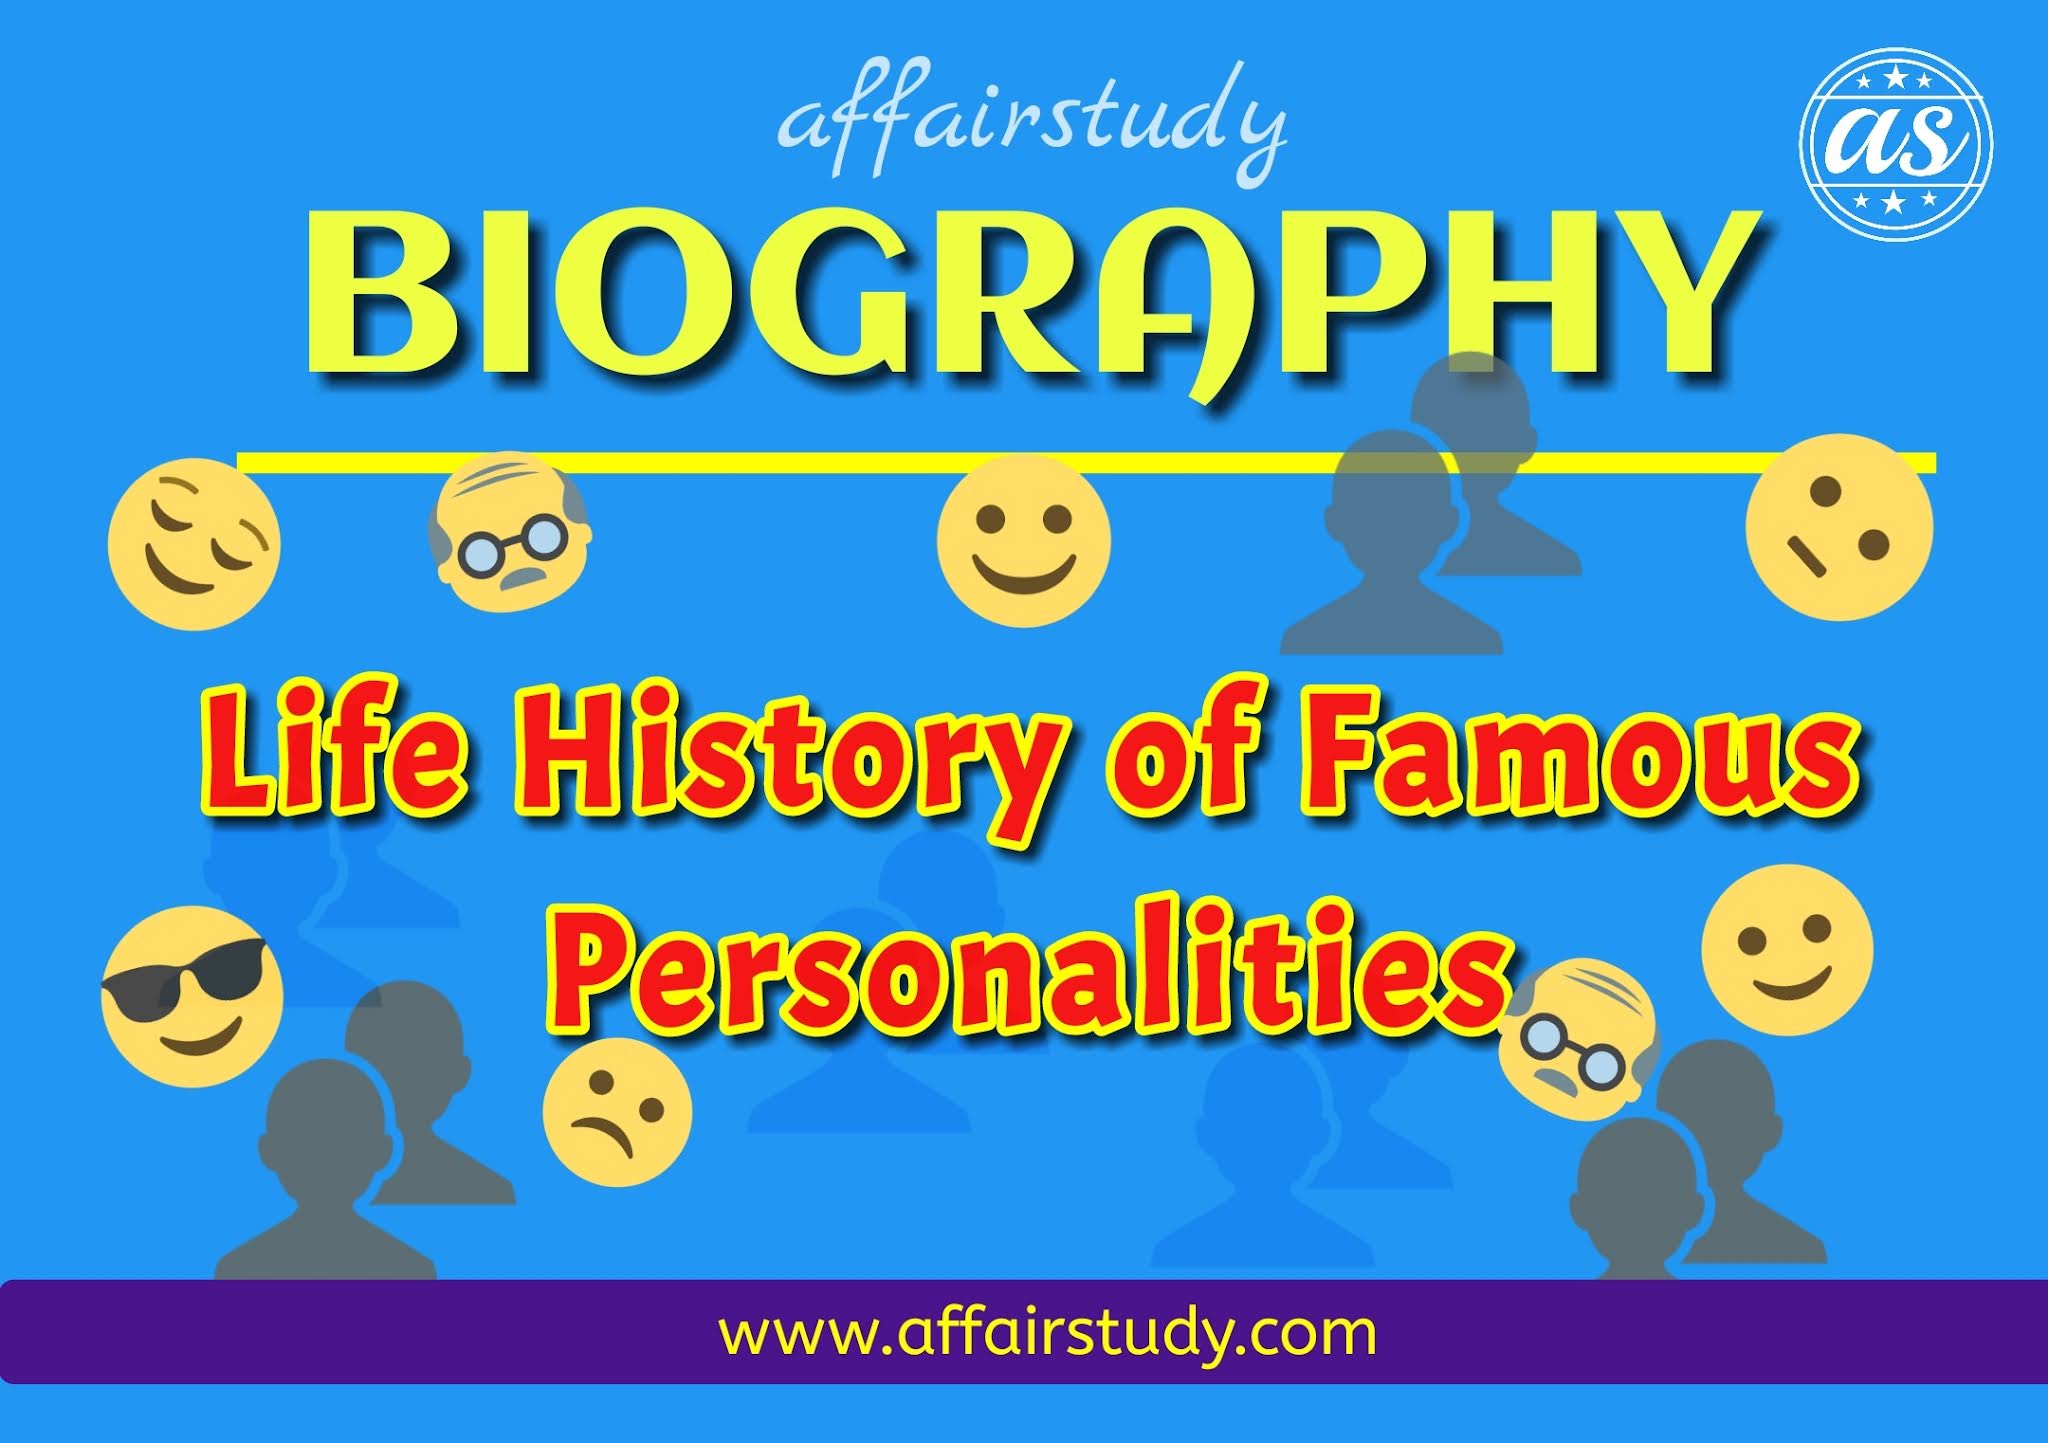 Biography of Famous Personalities